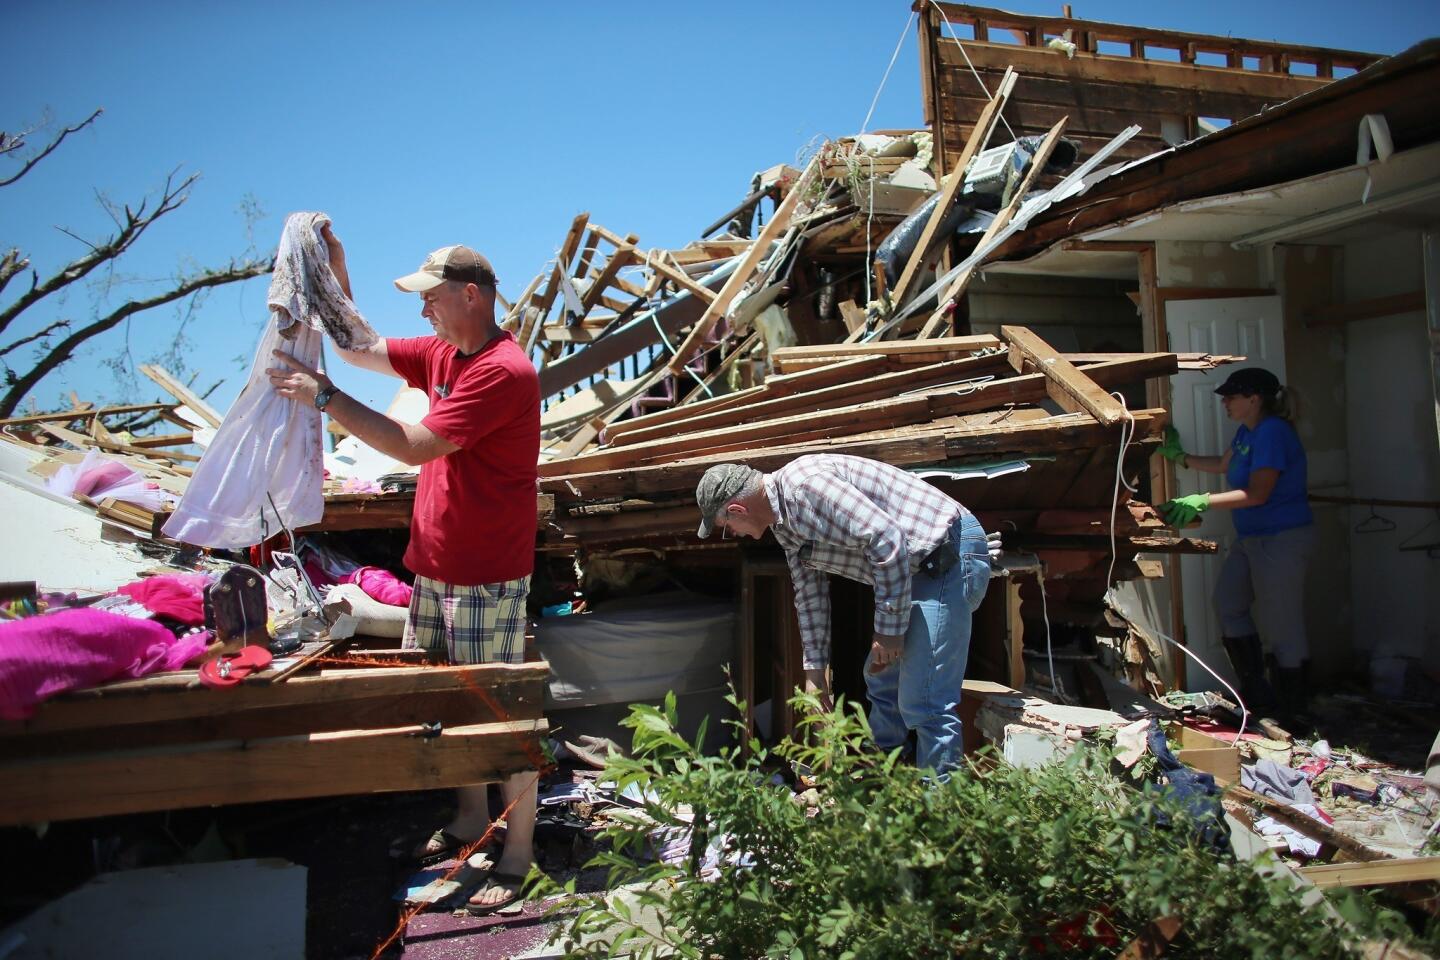 William Miles, left, Larry Corr and Kim van Aken salvage items from a home destroyed when a tornado hit Saturday in El Reno, Okla.